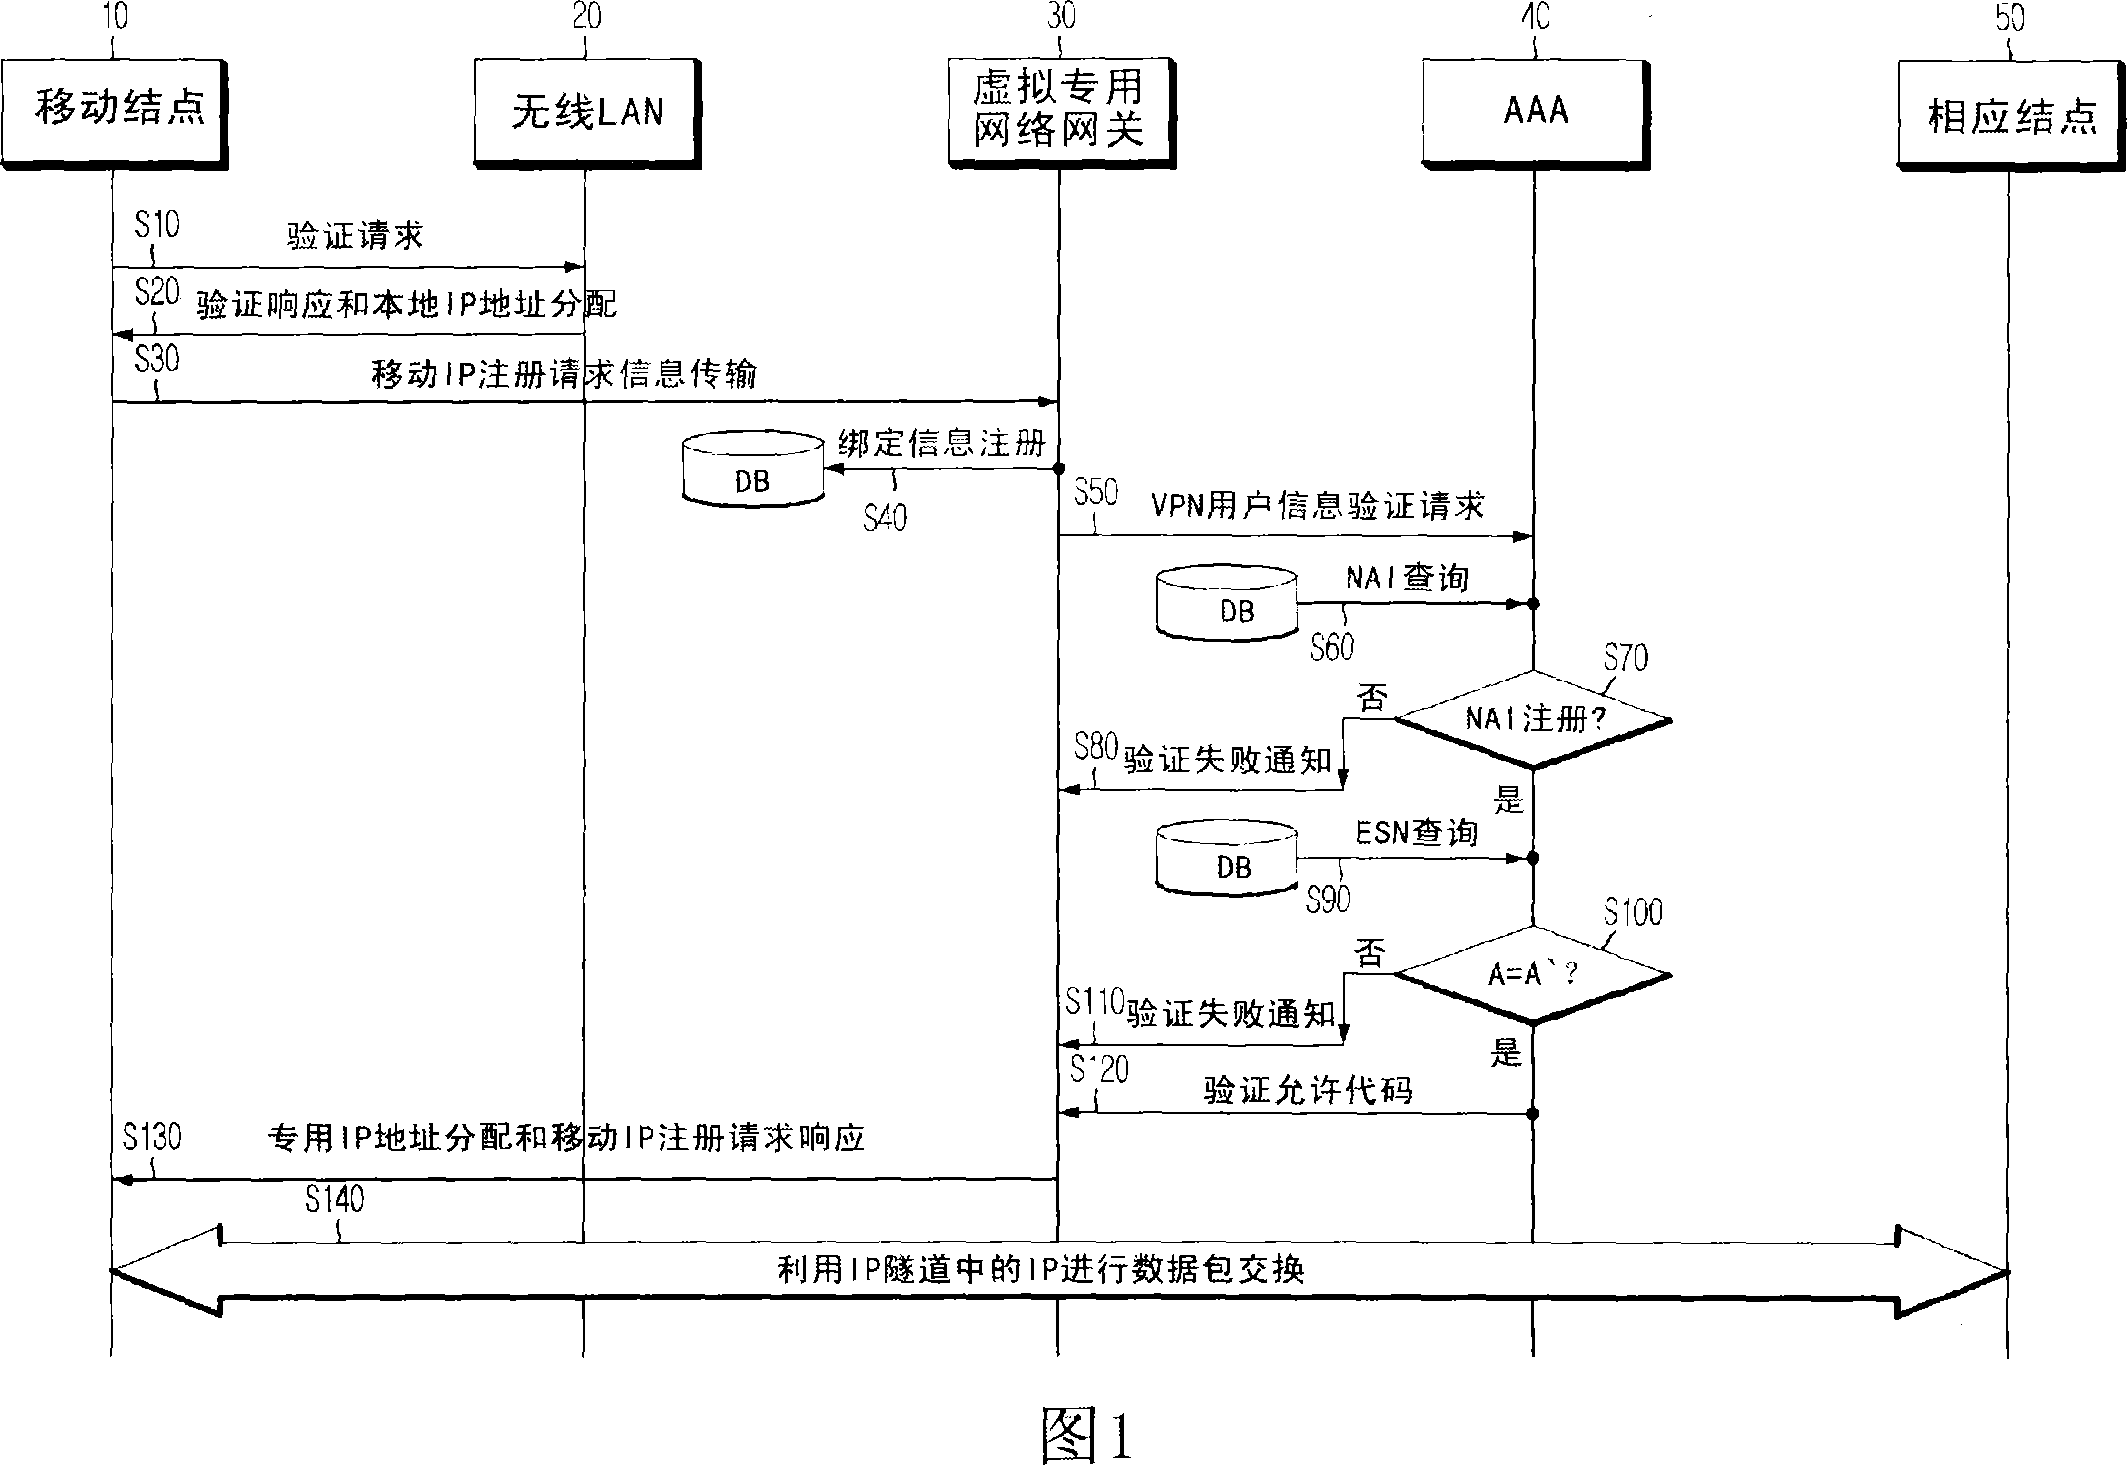 Method for mobile node's connection to virtual private network using mobile IP